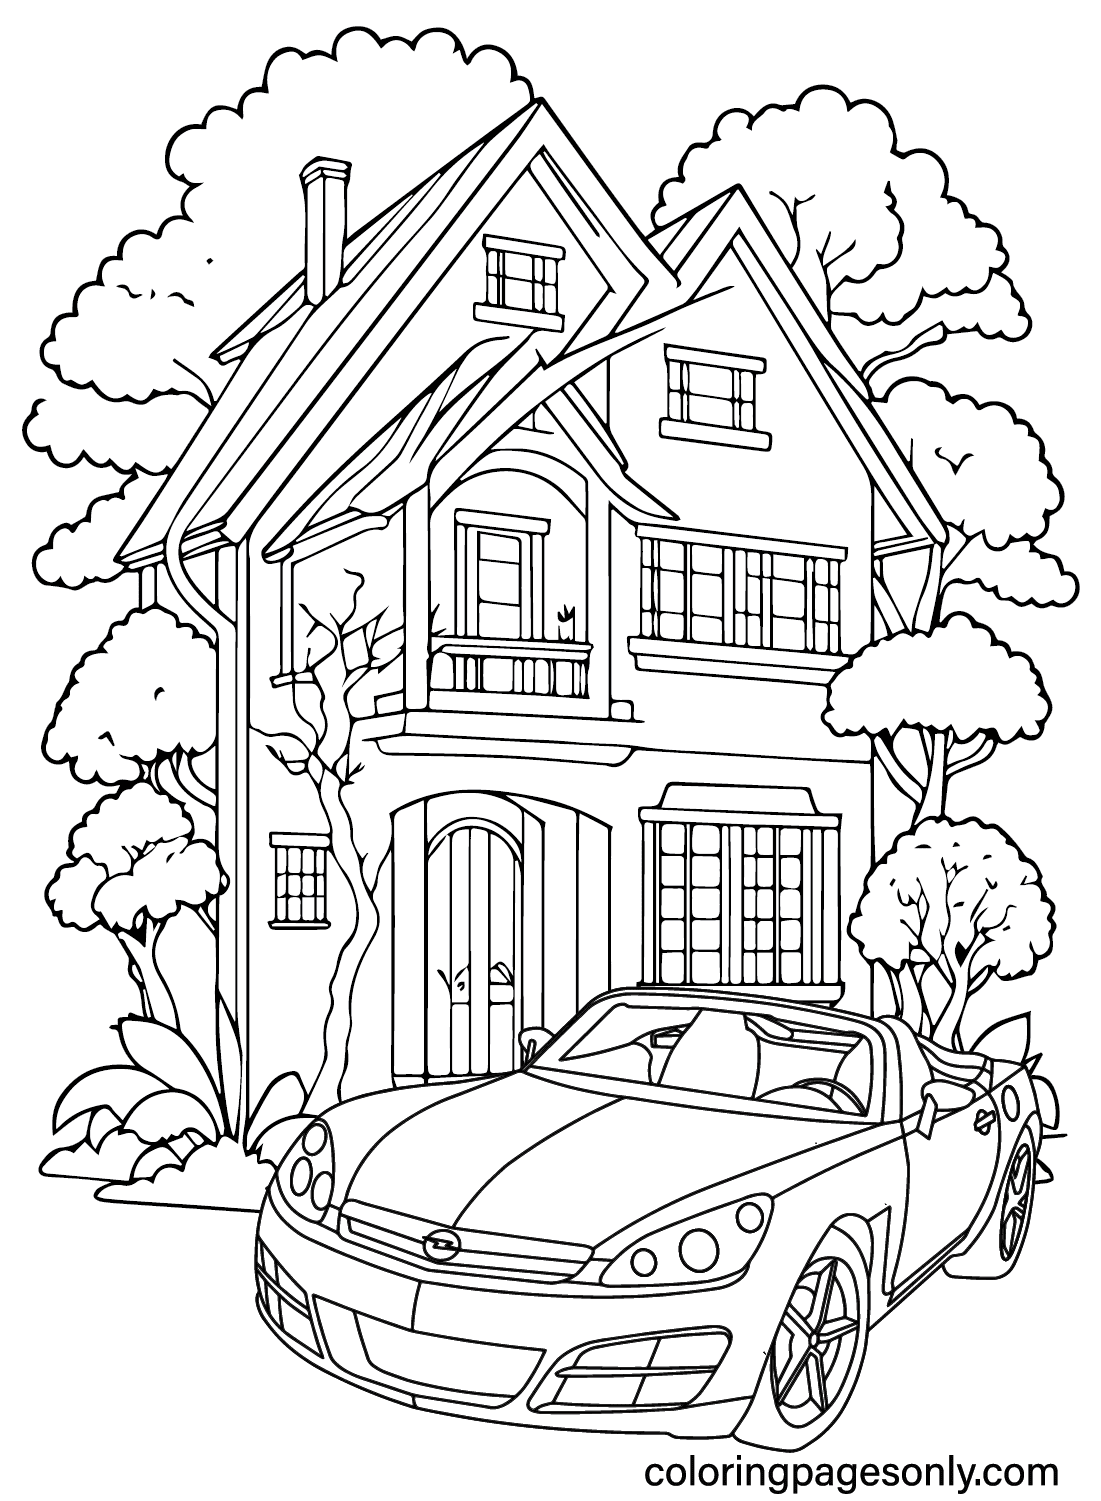 Print Opel Coloring Page from Opel